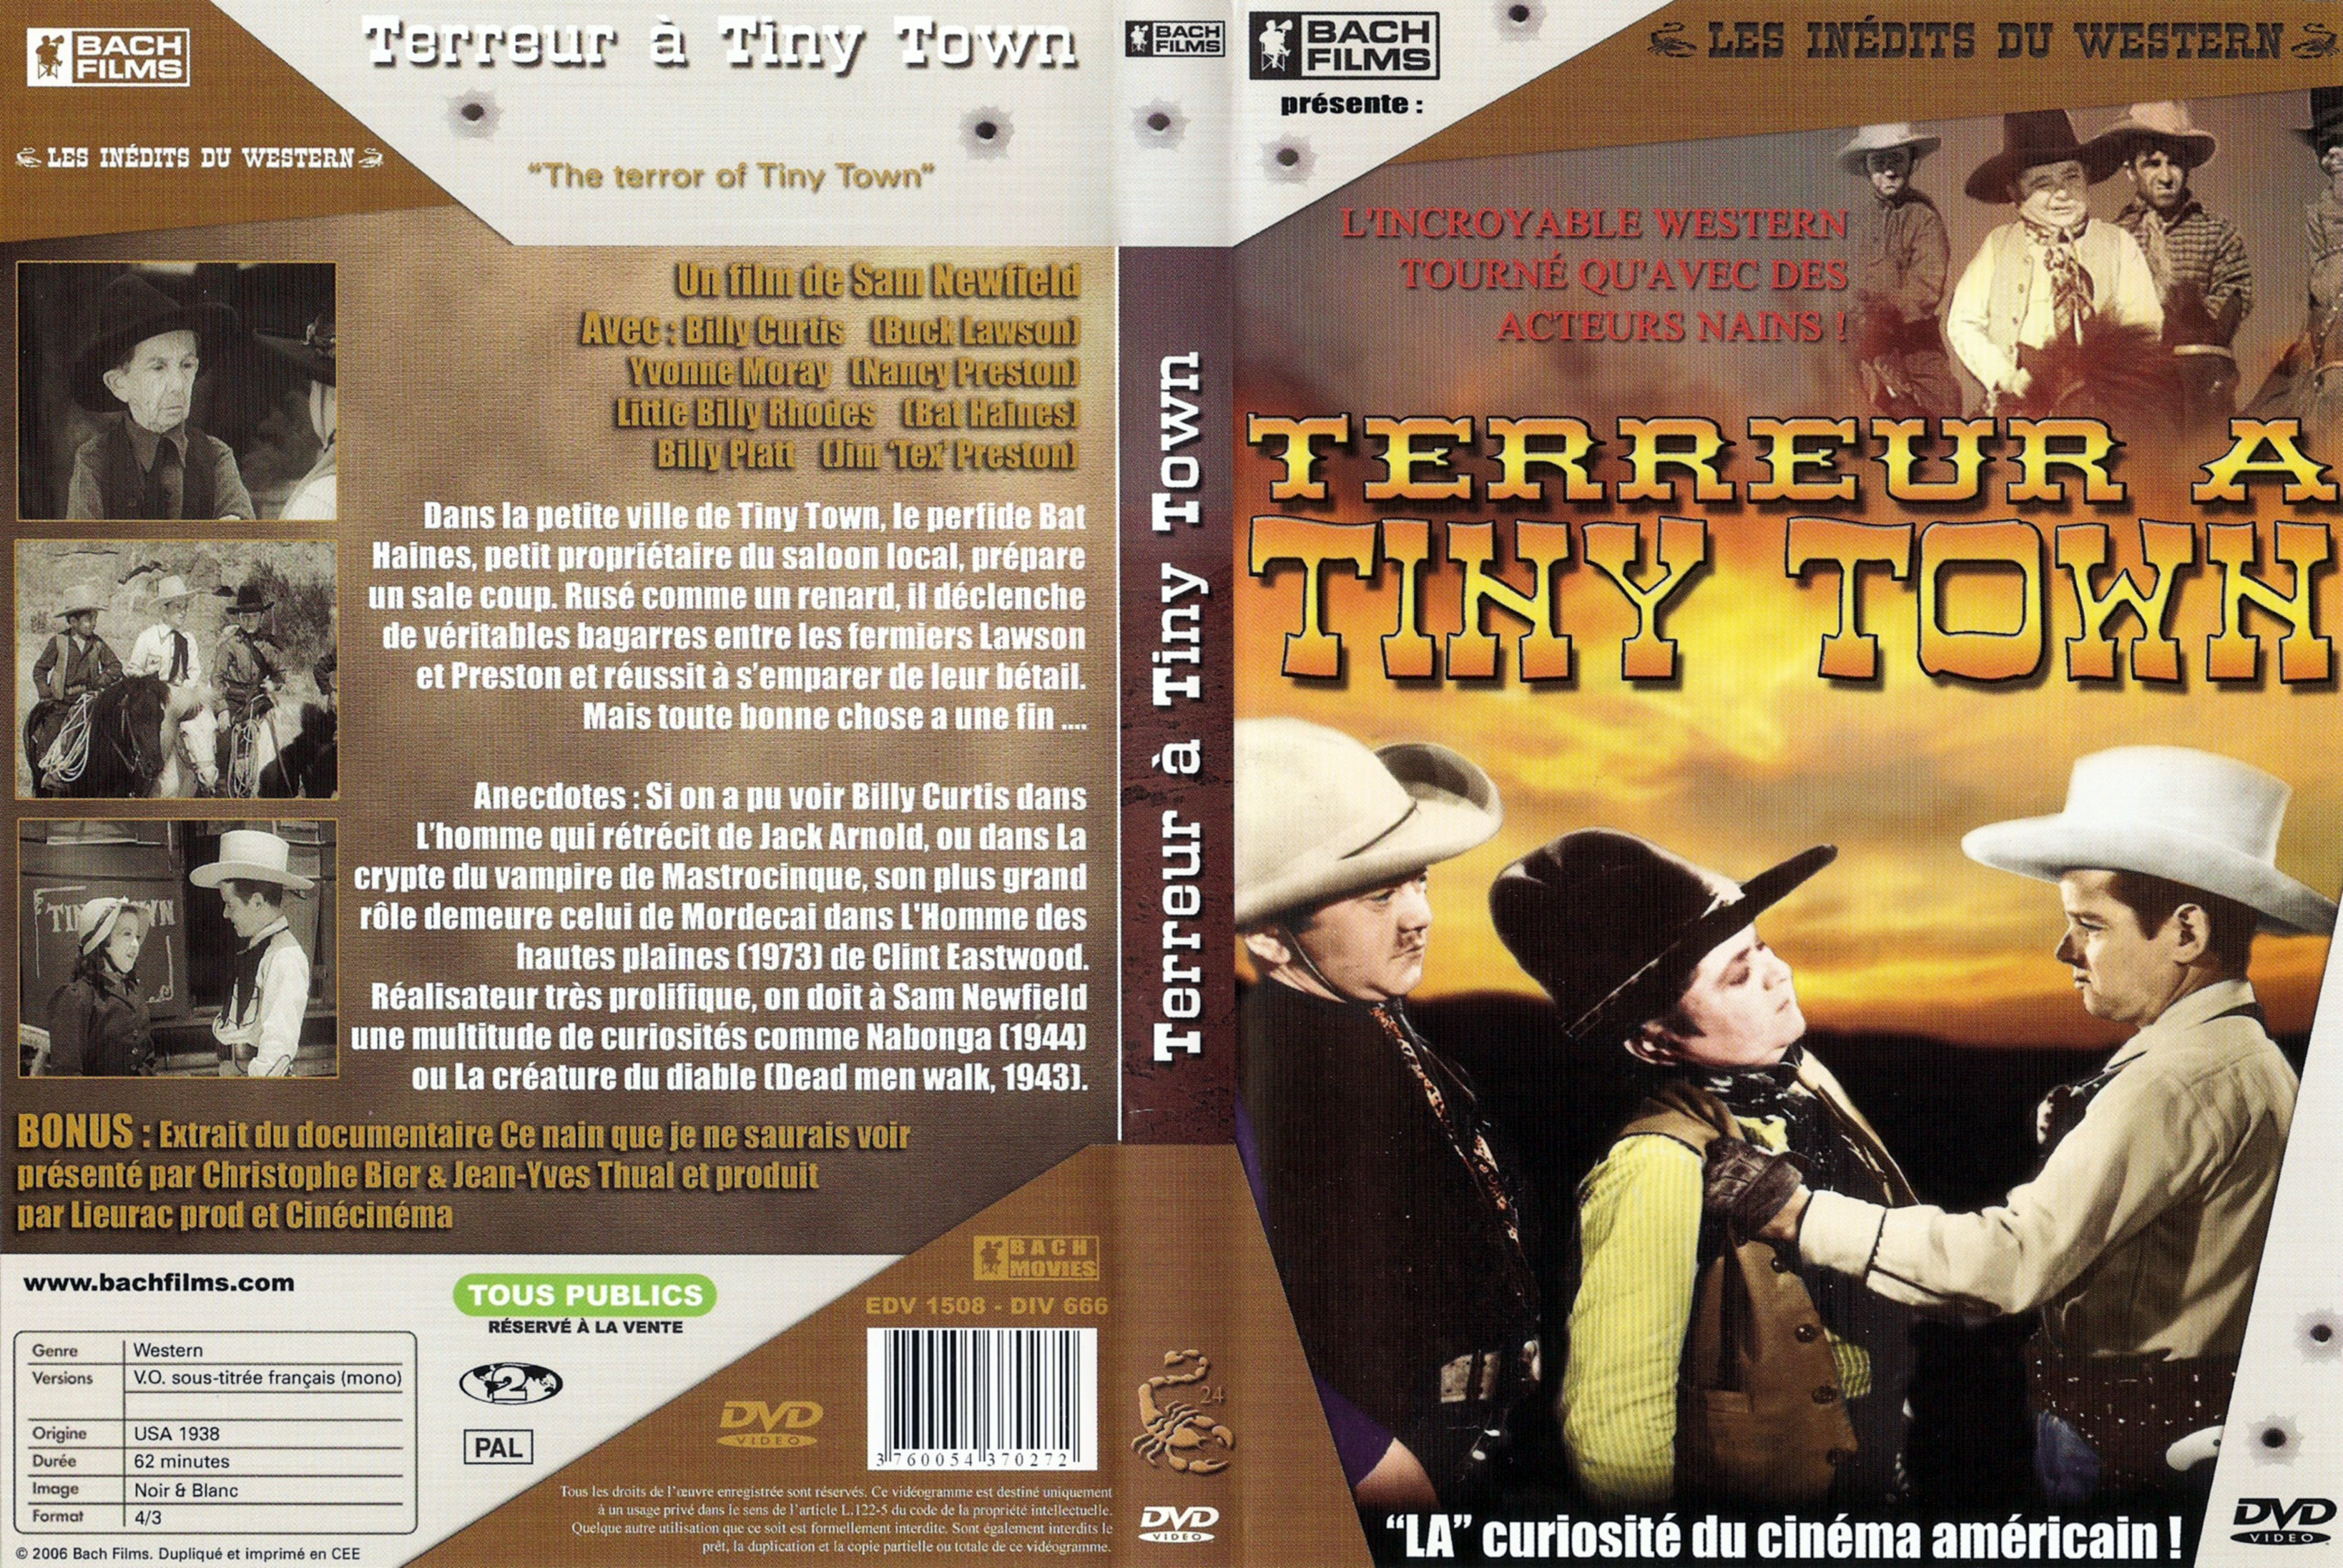 Jaquette DVD Terreur a Tiny Town